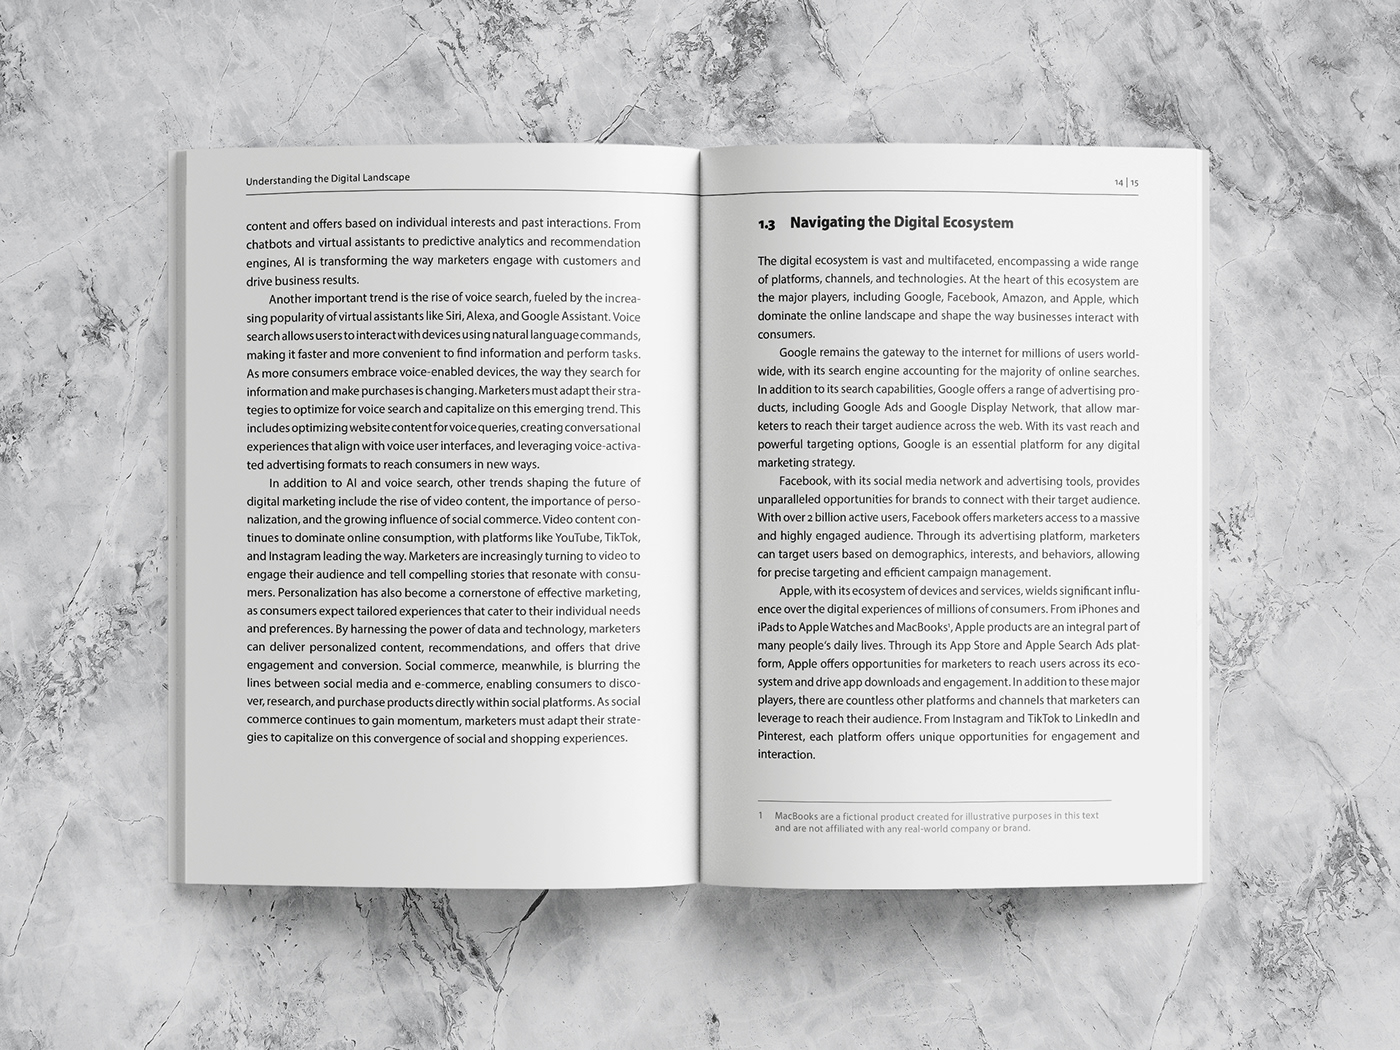 Book mockup – spread: Body text, subheading and a footnote